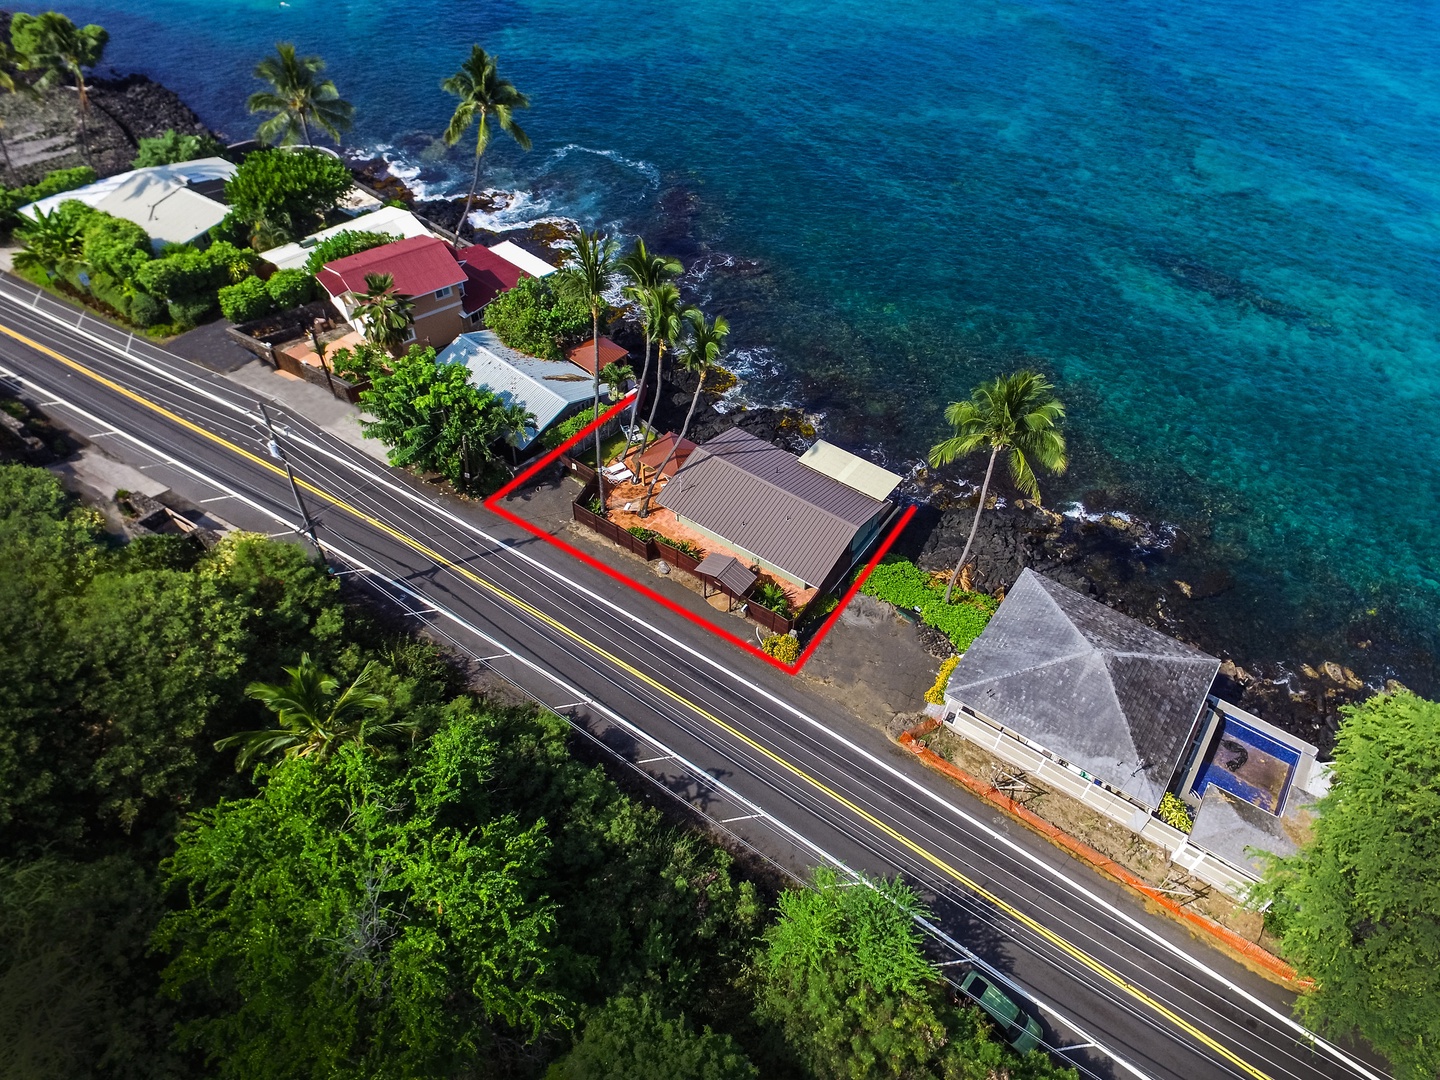 Kailua Kona Vacation Rentals, The Cottage - Don't let the Proximity to the road scare you all you hear is the ocean!